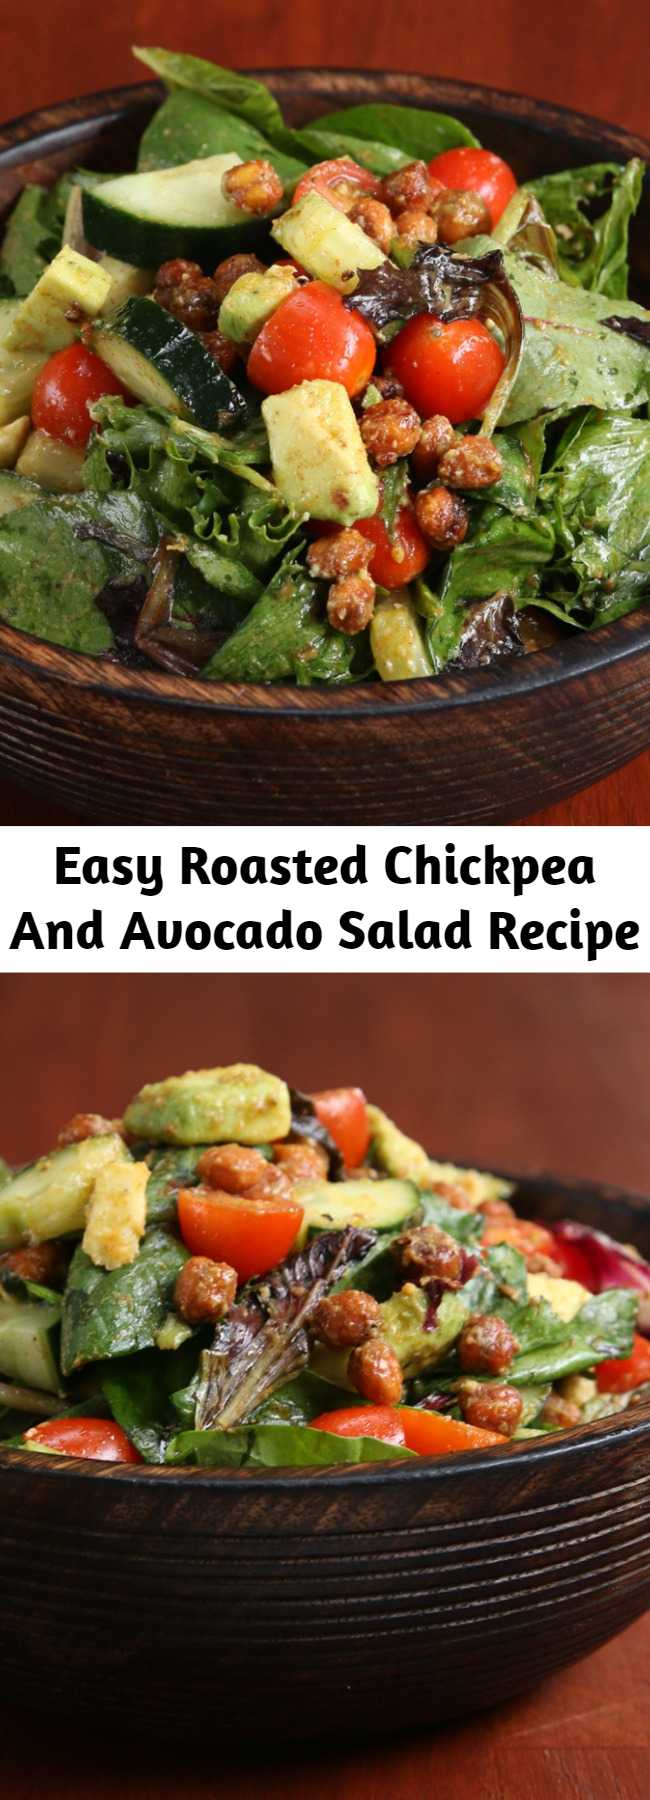 Easy Roasted Chickpea And Avocado Salad Recipe - Enjoy Lunch Even More With This Roasted Chickpea And Avocado Salad.